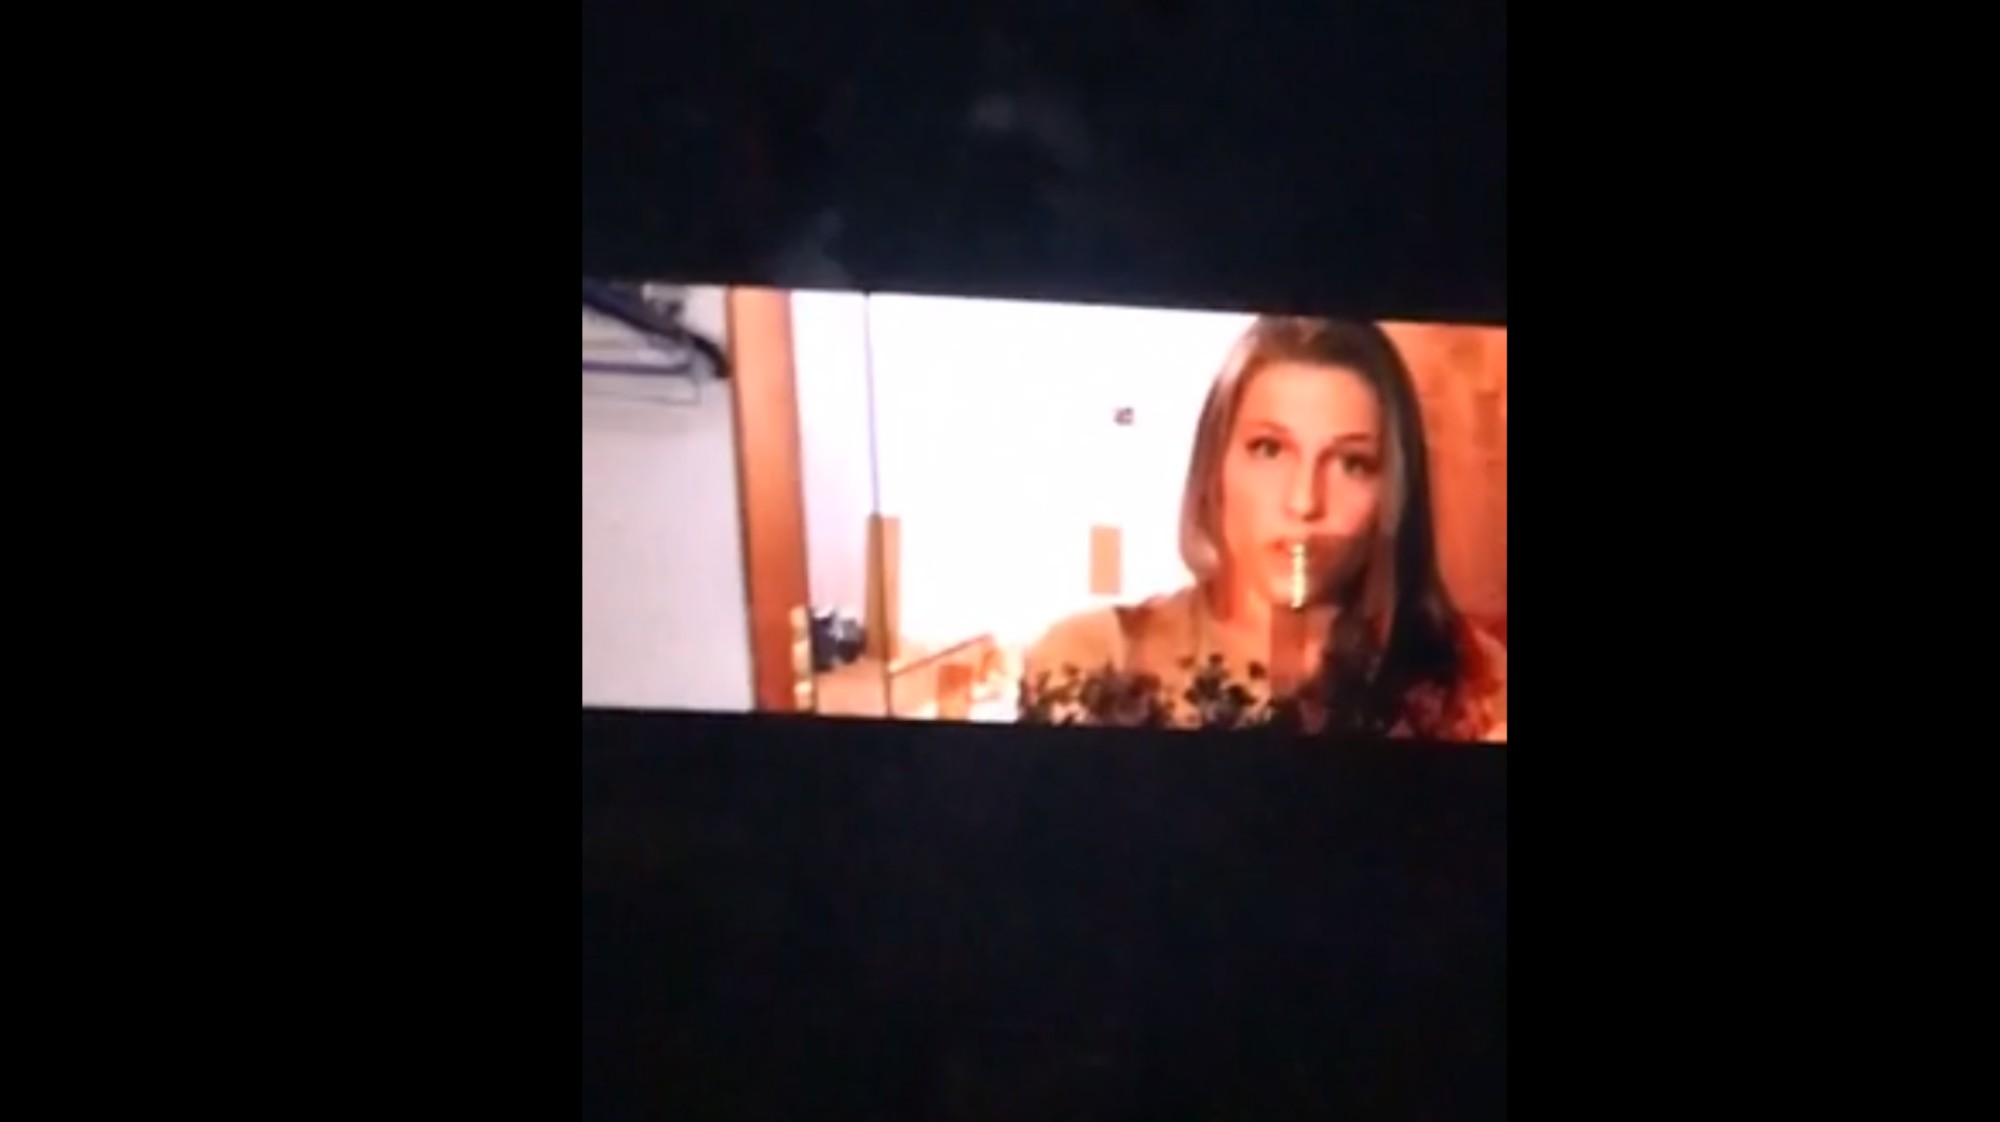 Before And After Blowjobs Porn - Threesome Blowjob Scene on Giant Highway Billboard Could ...